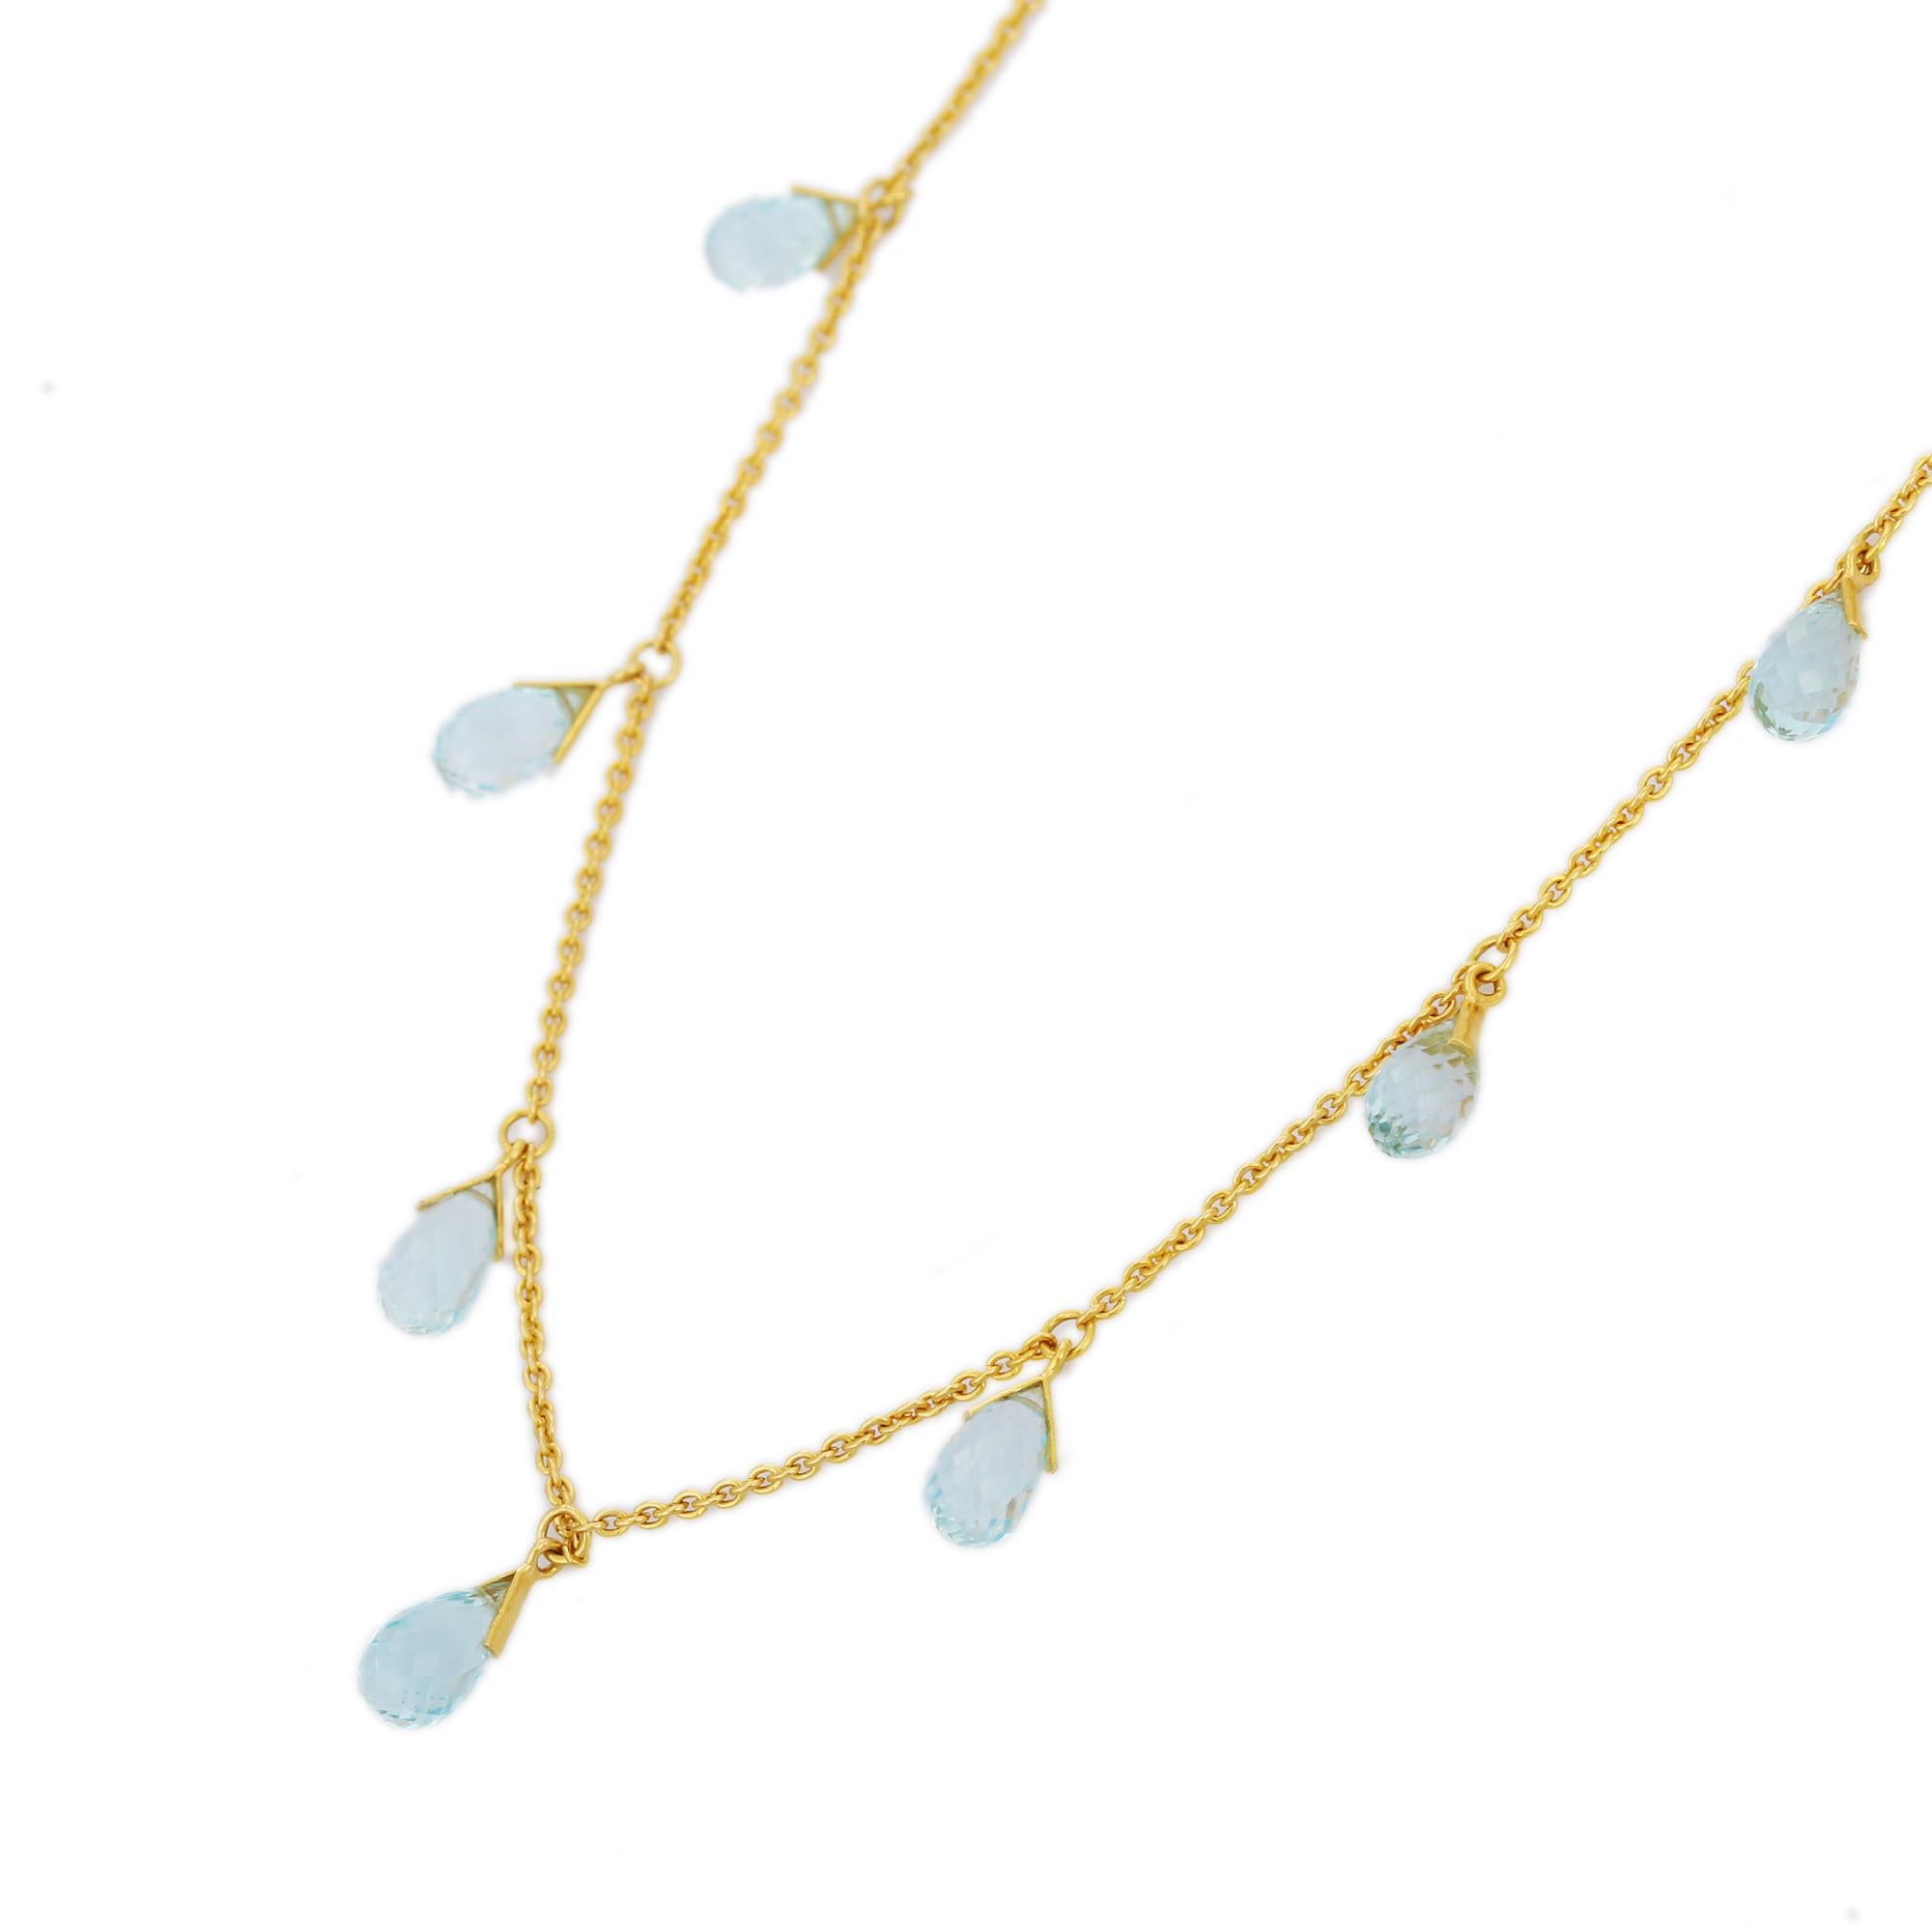 Blue Topaz Necklace in 18K Gold studded with drop cut topaz pieces.
Accessorize your look with this elegant blue topaz drop necklace. This stunning piece of jewelry instantly elevates a casual look or dressy outfit. Comfortable and easy to wear, it